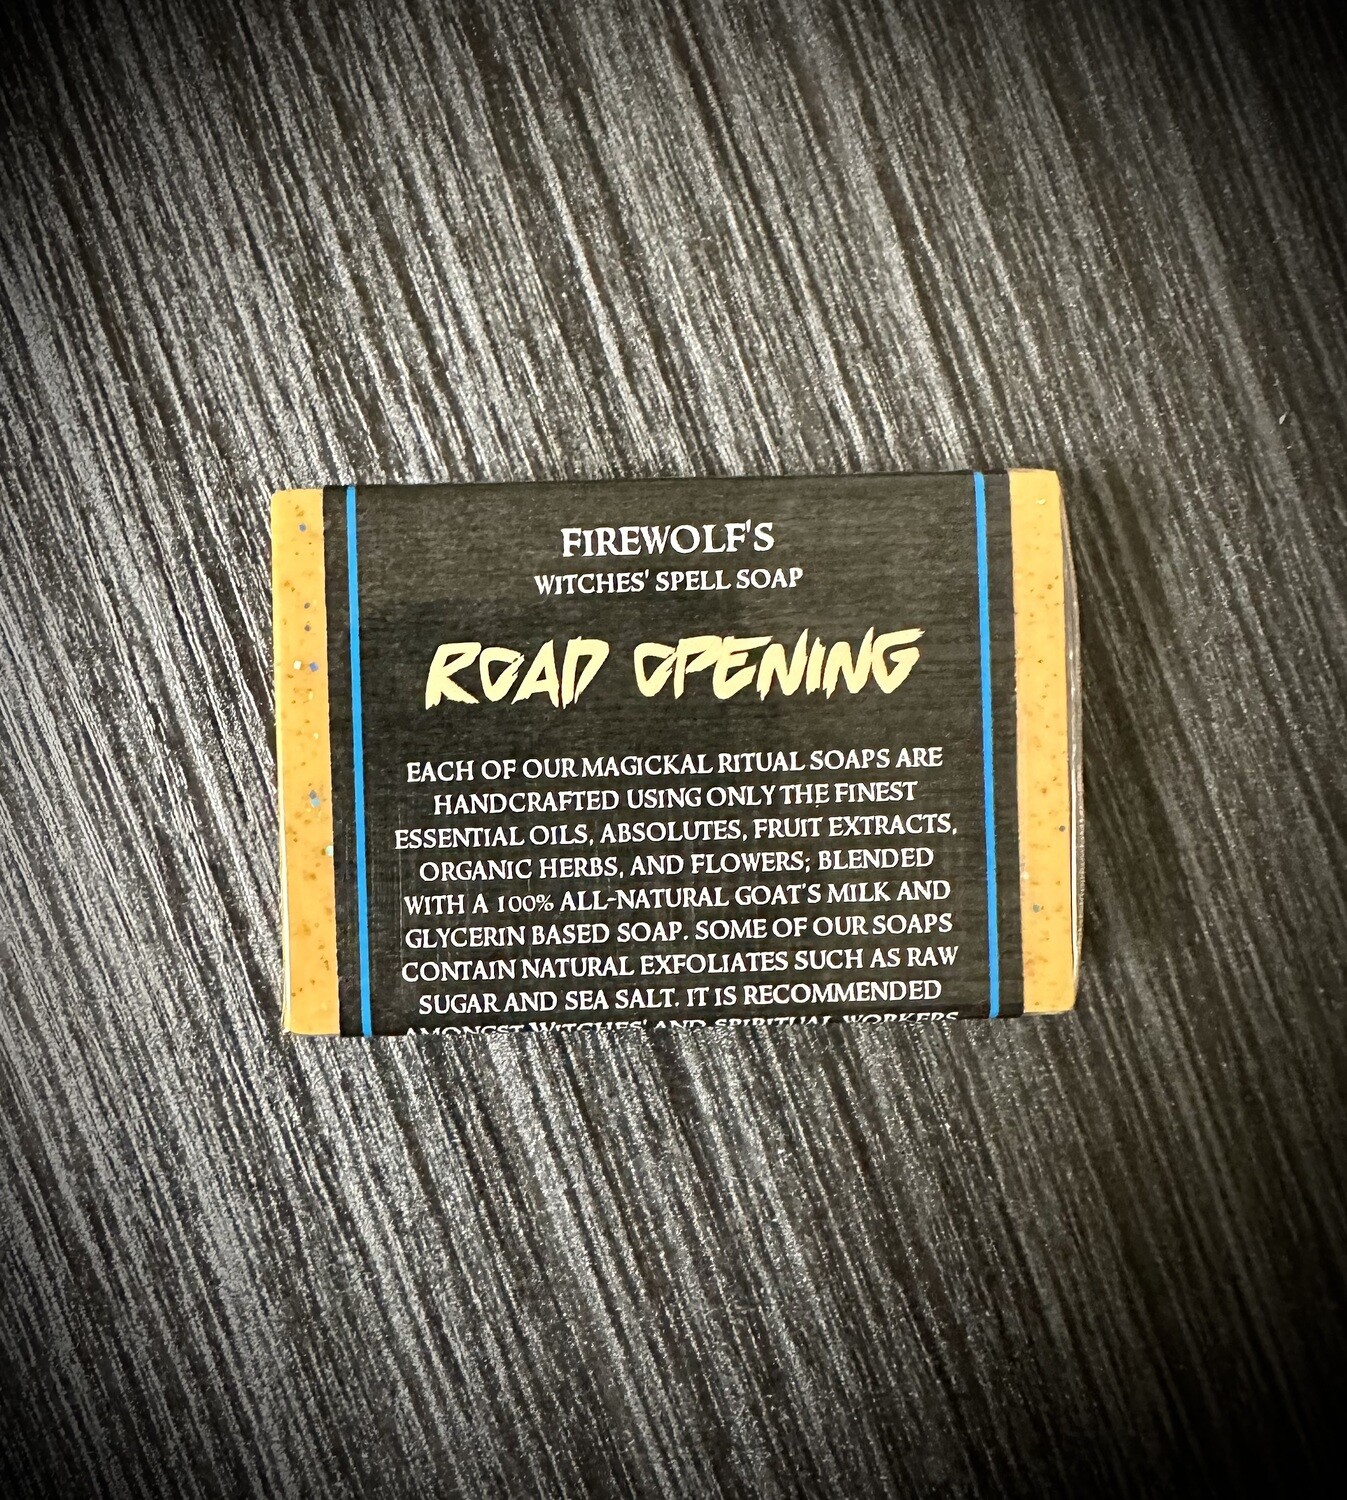 ROAD OPENING Witches' Magick Soap